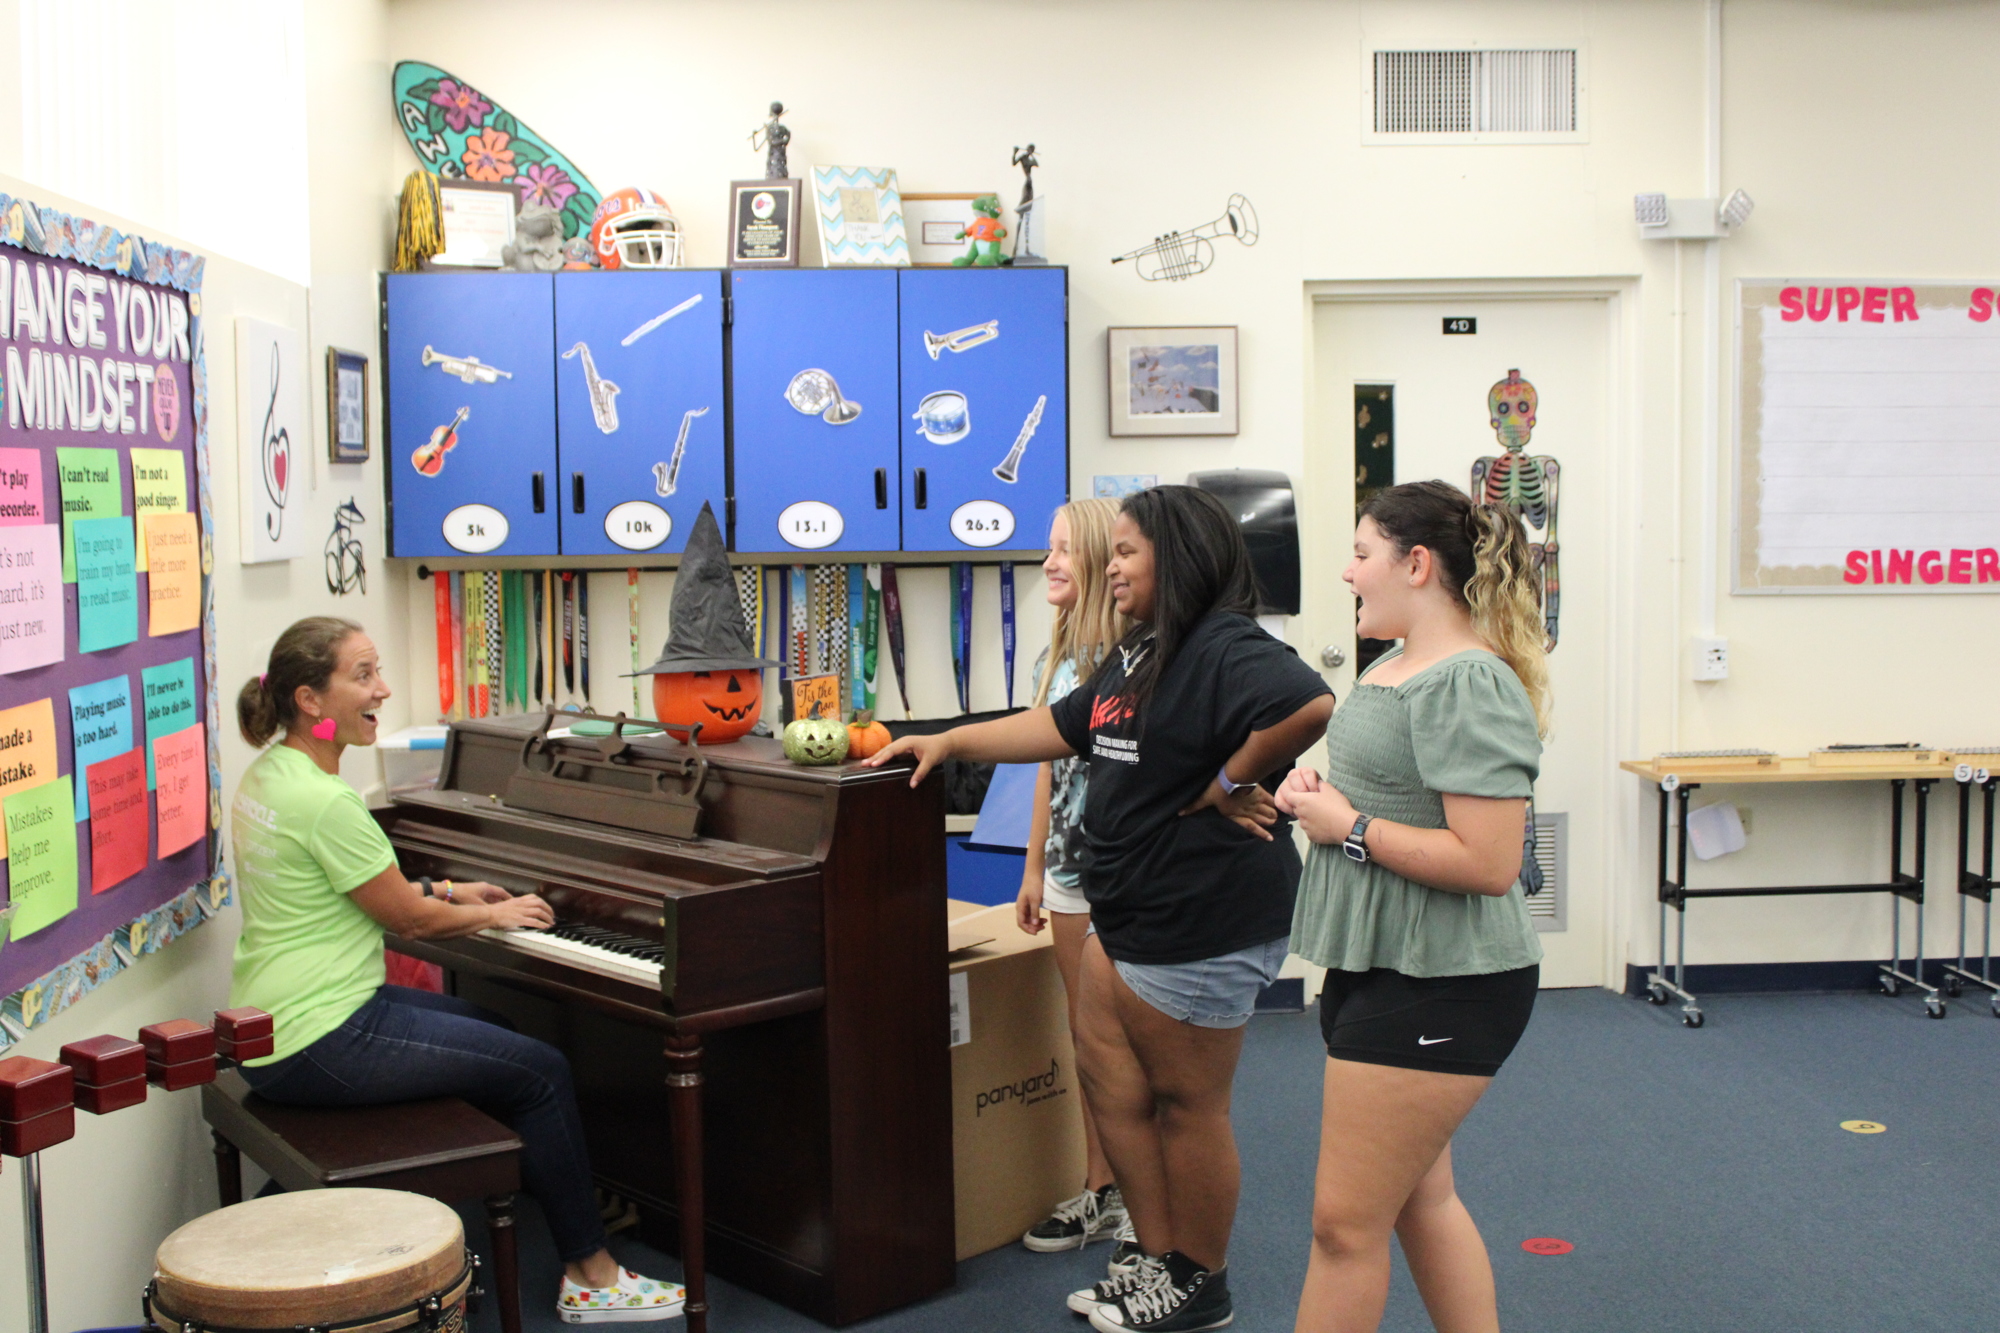 Sara Johns and her students — Rena Raymond, Amaya Mathon and Adele Rae — practice for the All-State concert. Photo by Alexis Miller